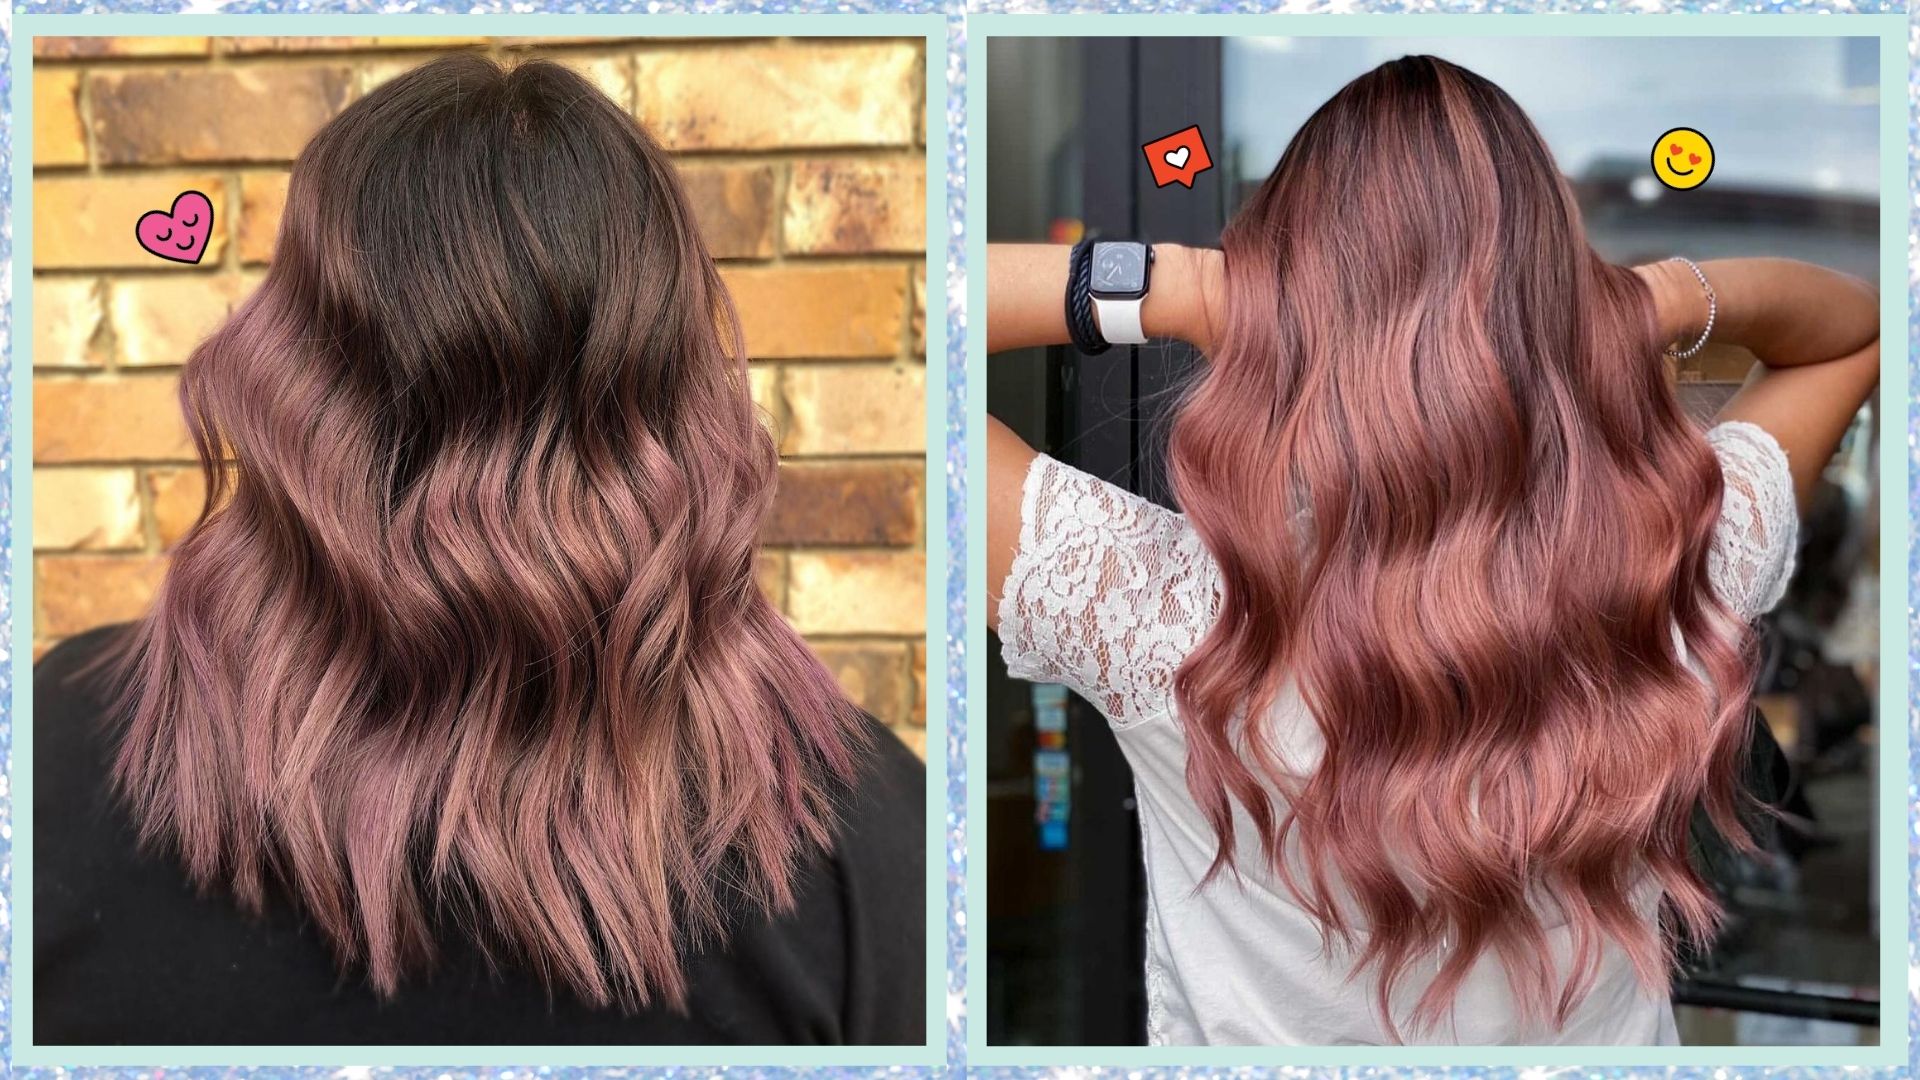 8. "Gorgeous Pink and Blue Ombre Hair Ideas for a Subtle Pop of Color" - wide 3